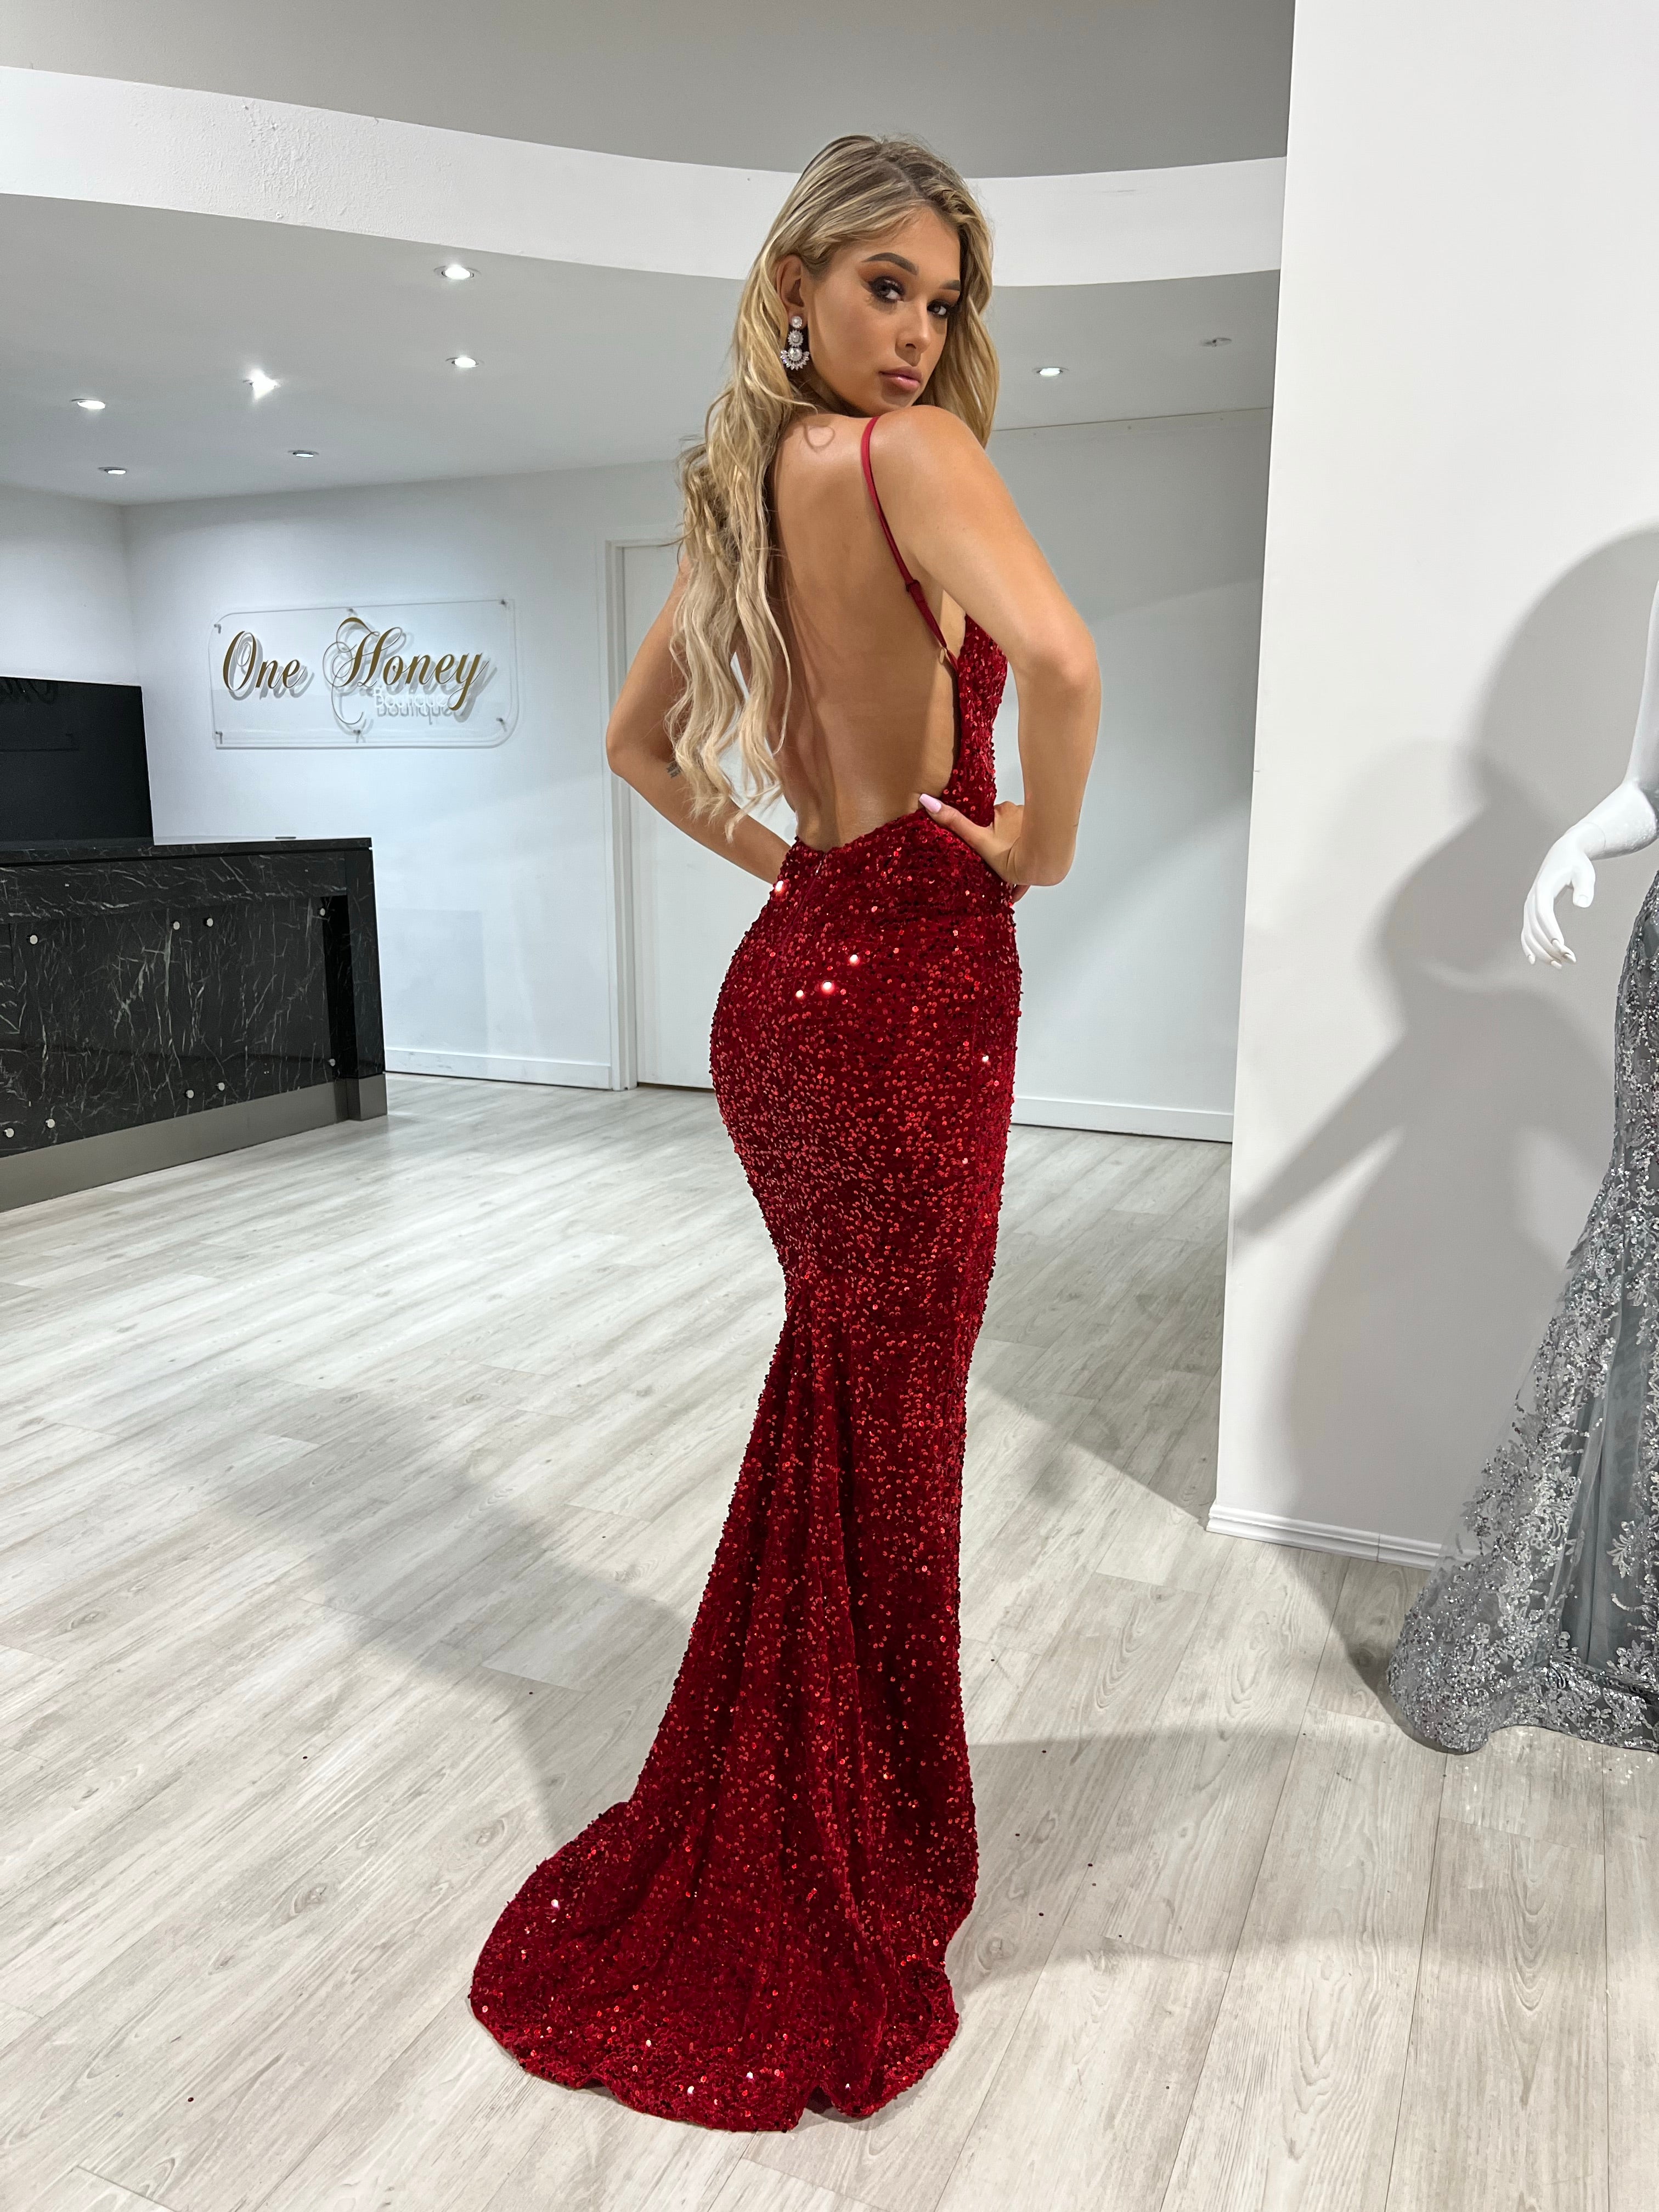 Honey Couture KAYTUM Red Sequin Mermaid Evening Gown Dress